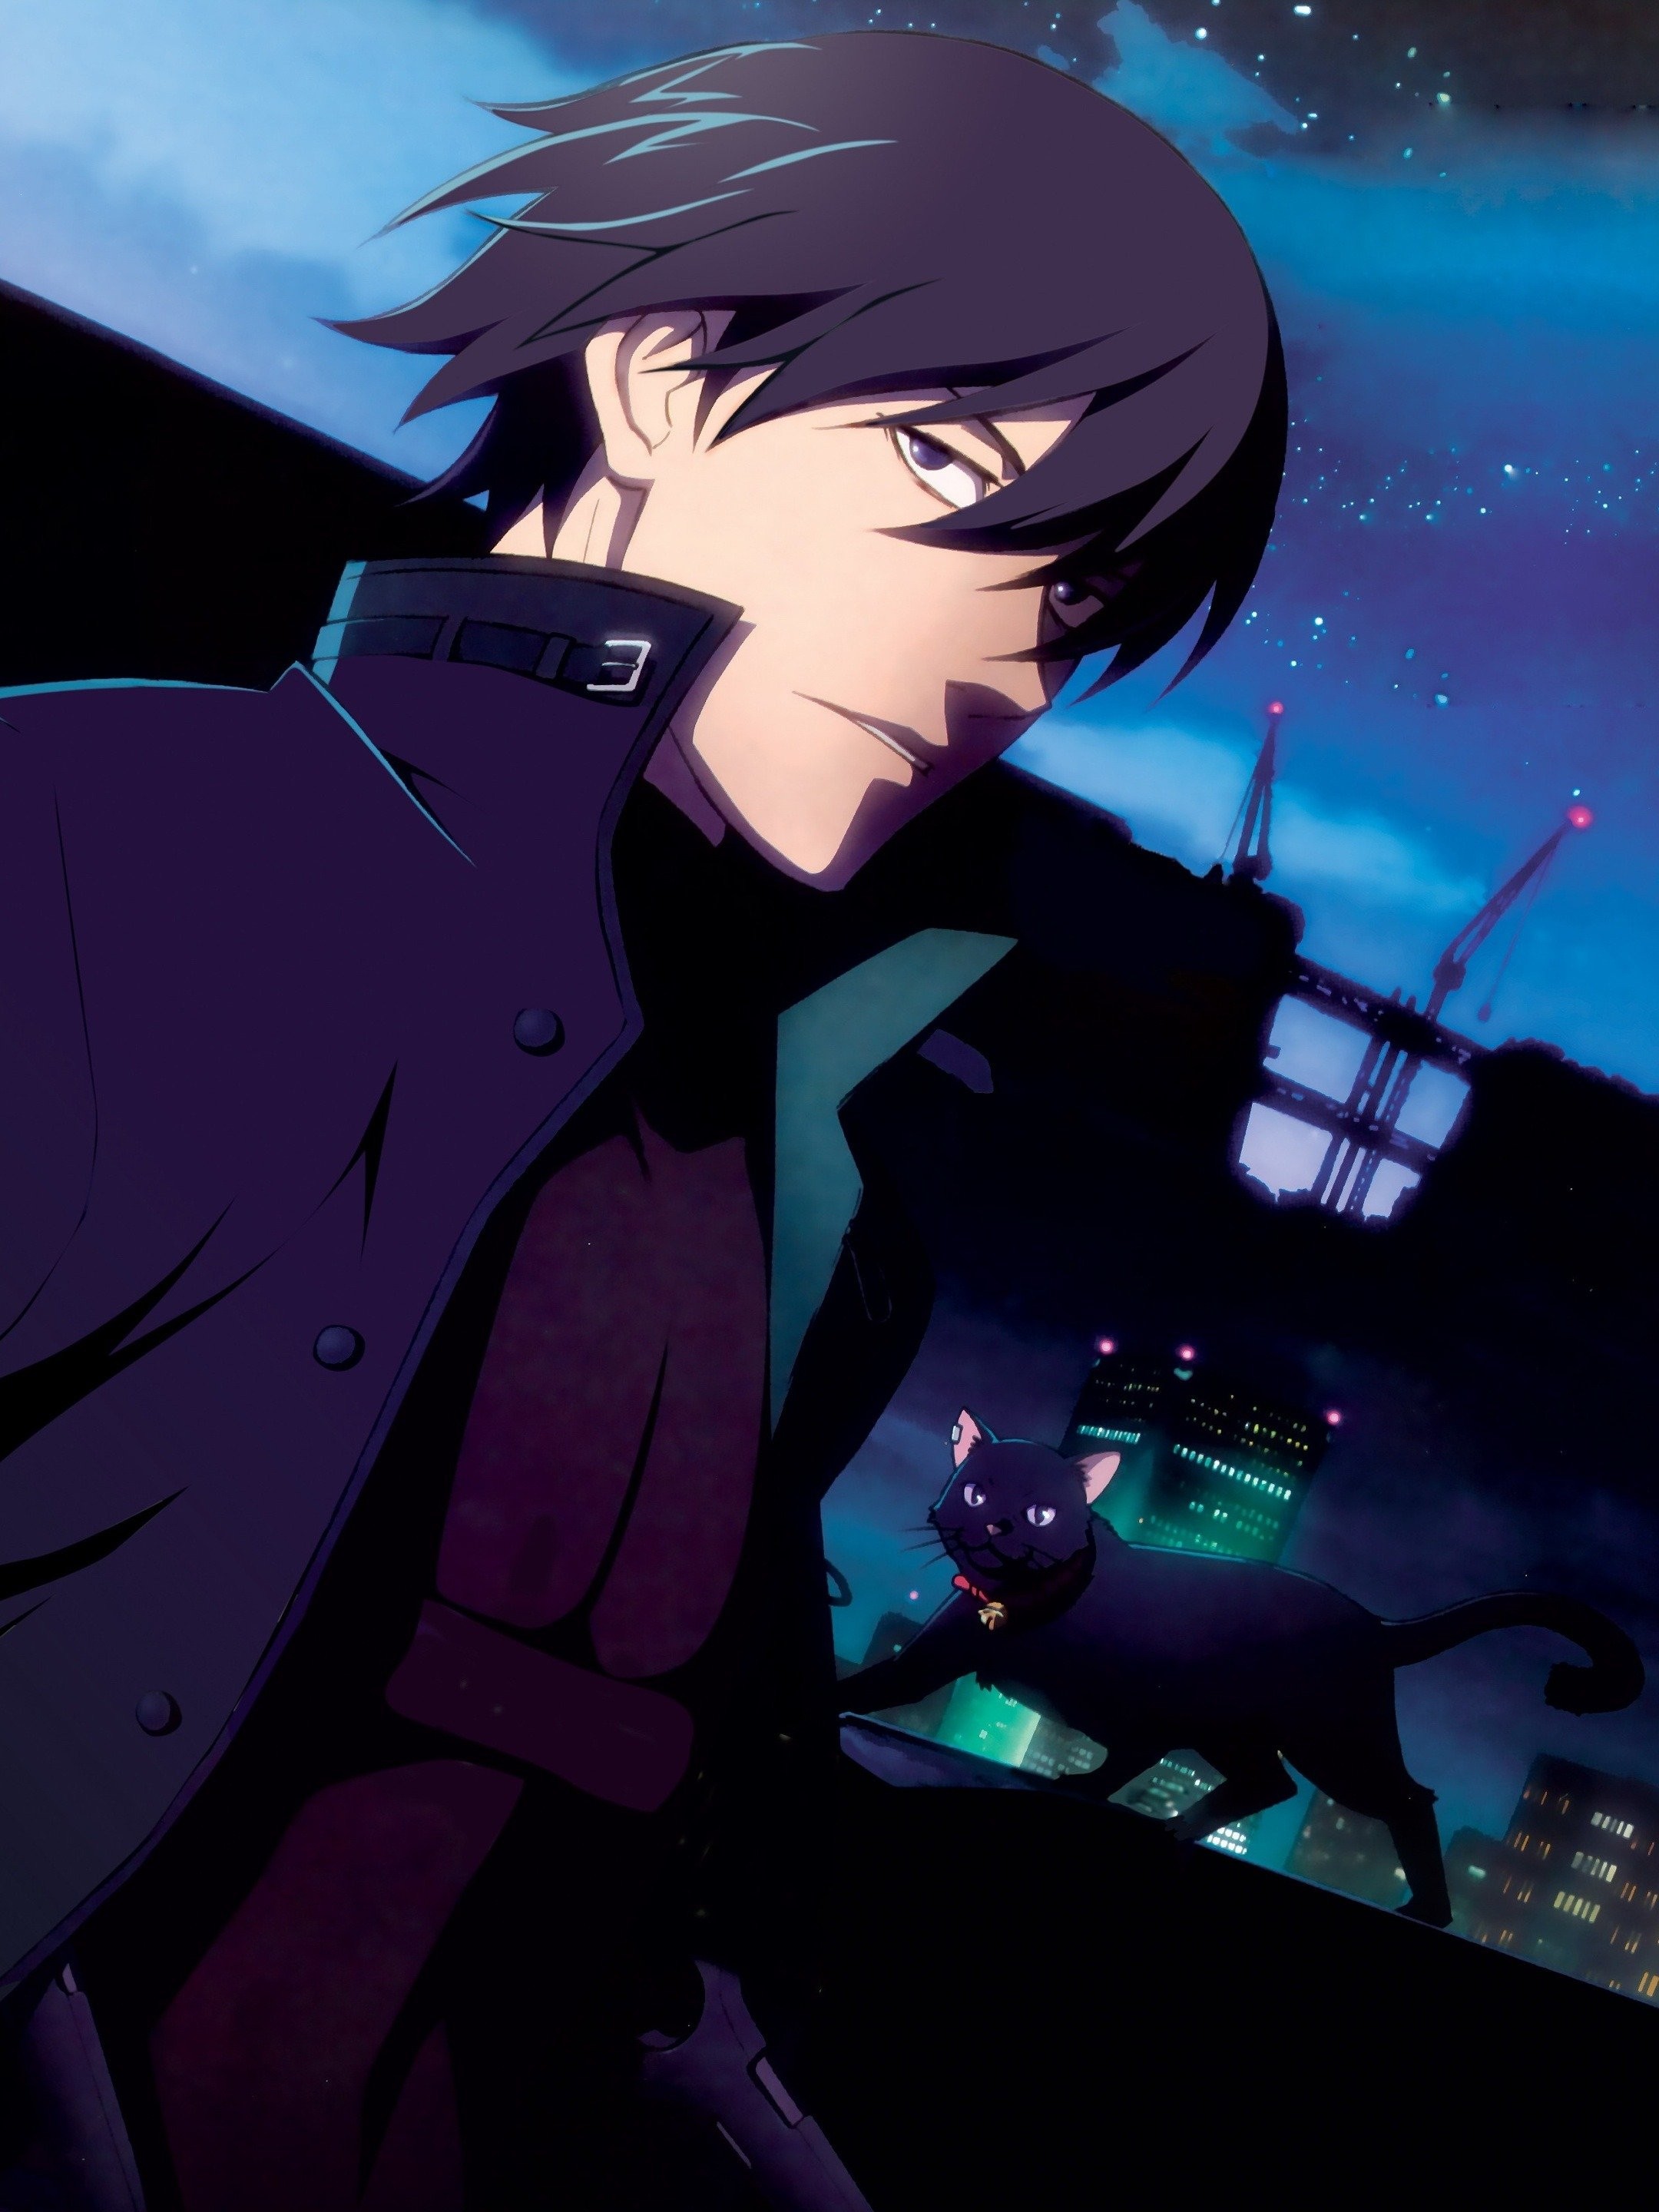 A Review of Darker Than Black, Season One